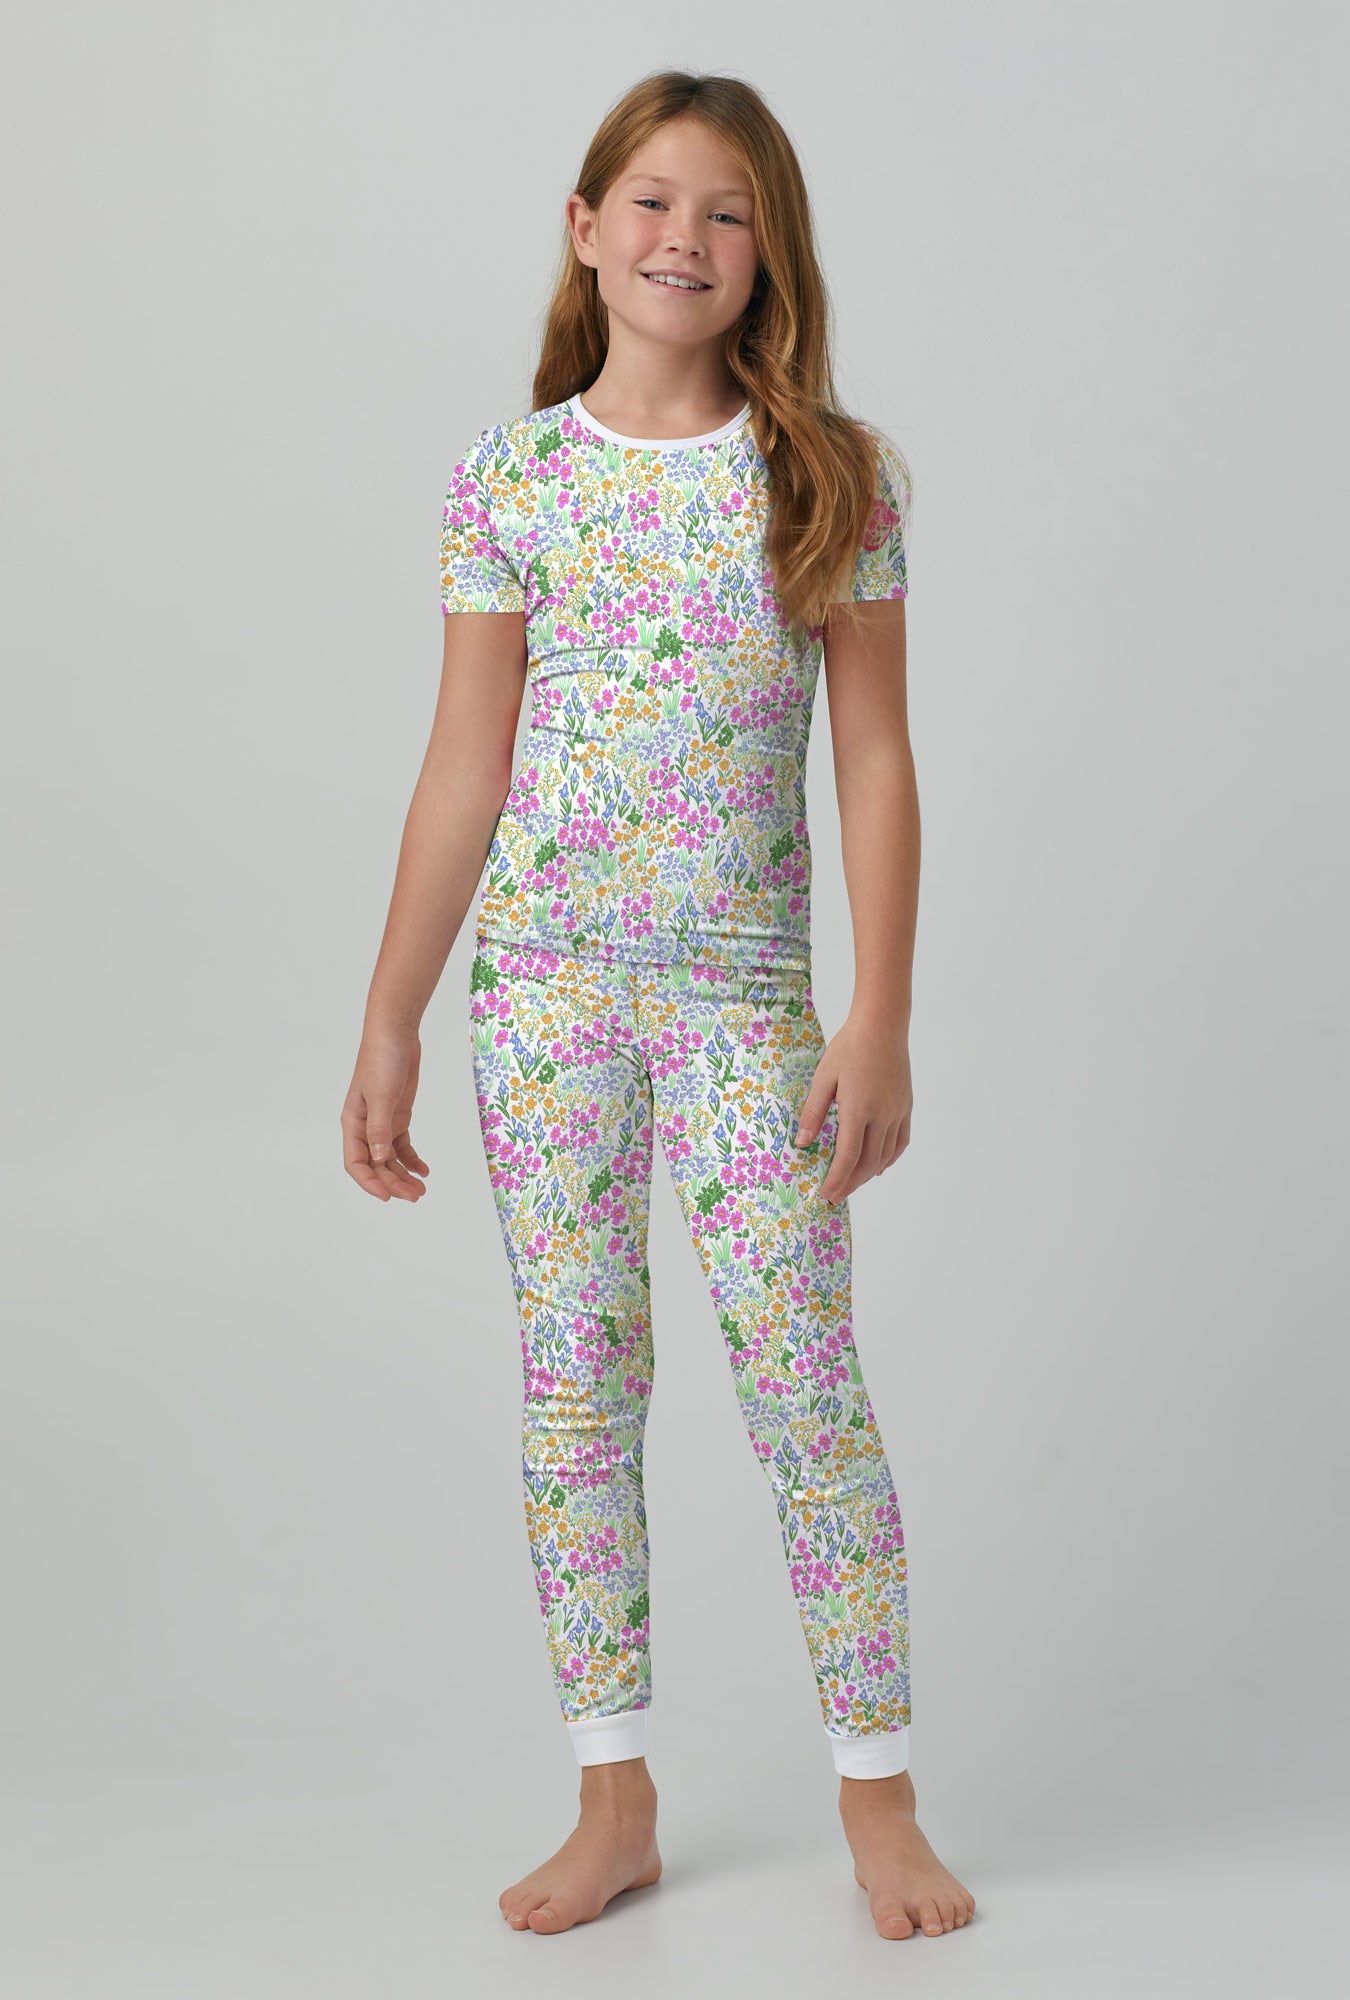 A kid wearing multi color short sleeve stretch jersey kids pj set with cottage garden print.